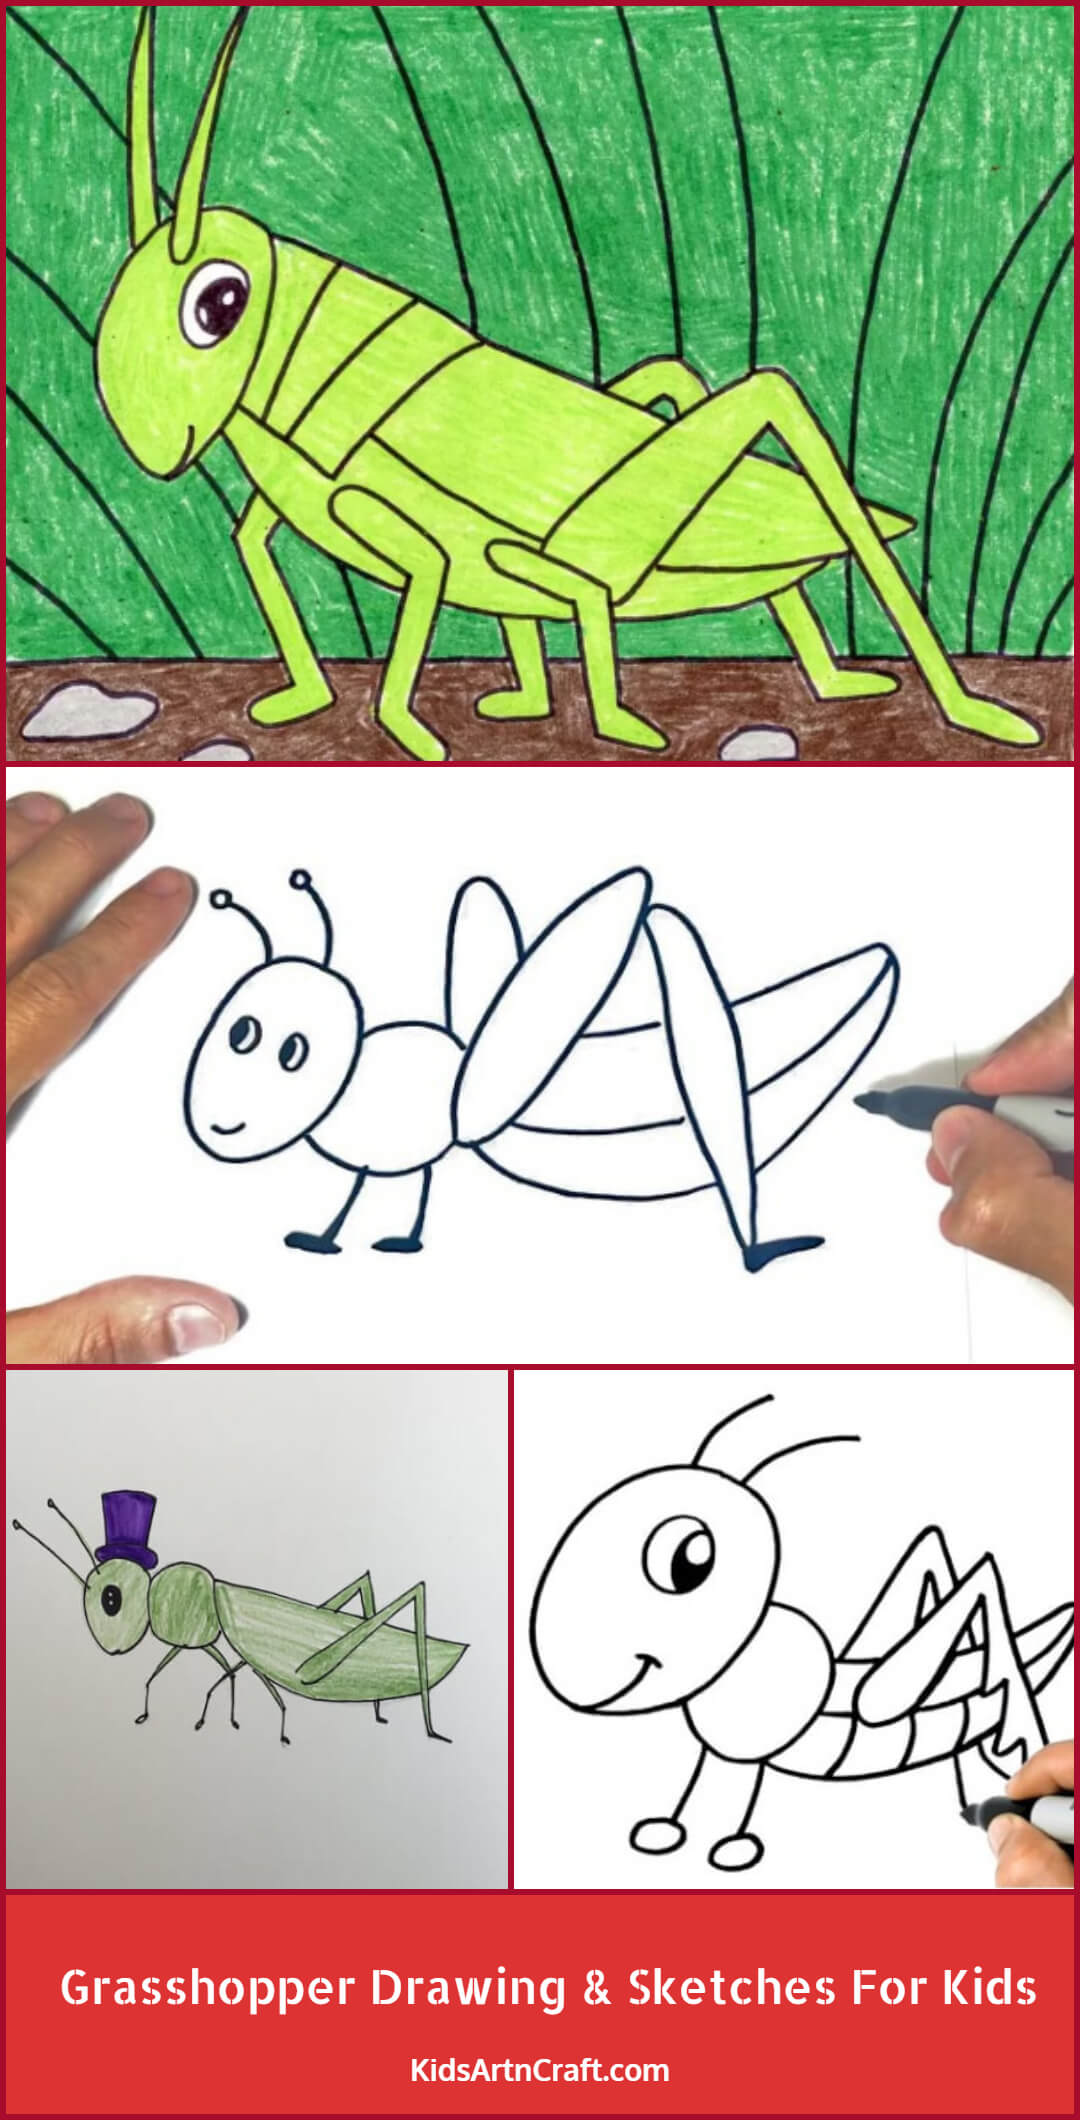 Grasshopper Drawing & Sketches For Kids